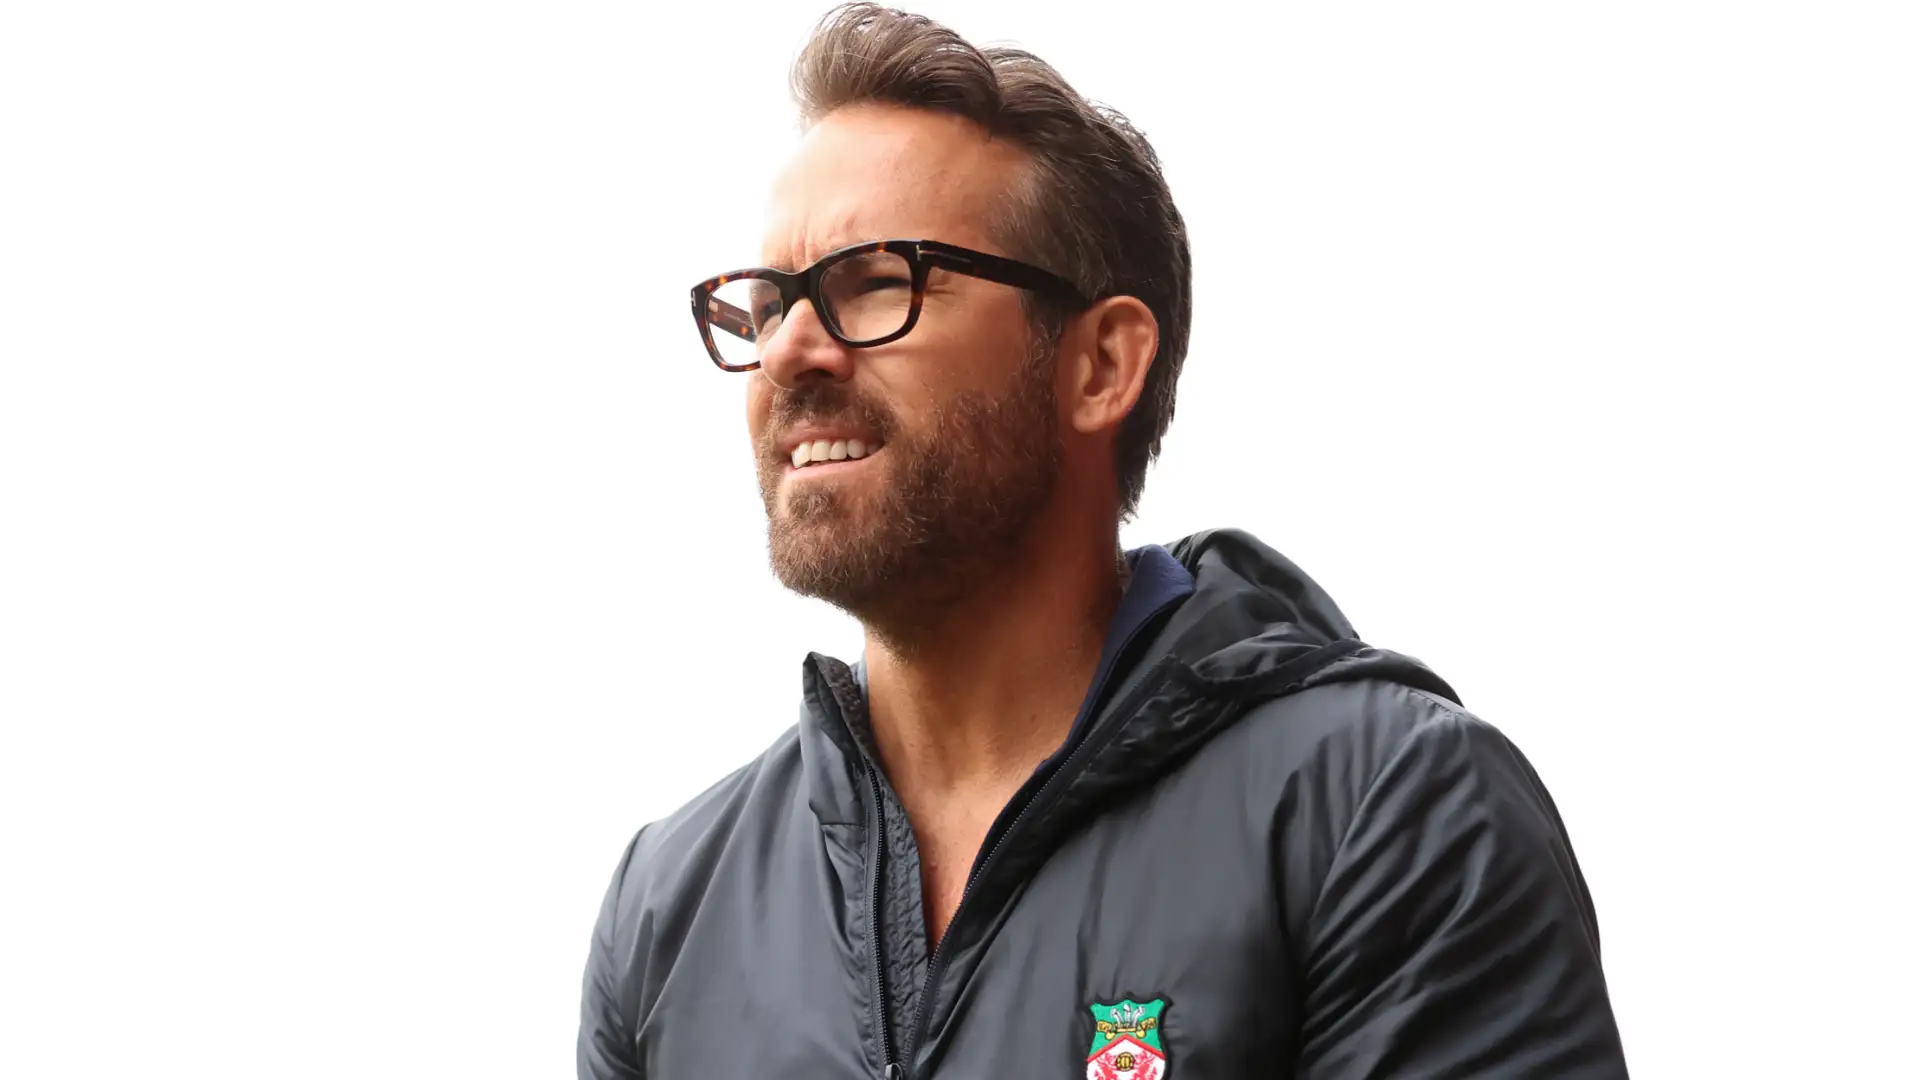 VIDEO: 'The most inspiring, beautiful thing' - Ryan Reynolds delighted with how Wrexham have 'transformed' Welsh town as Hollywood star takes dig at NFL